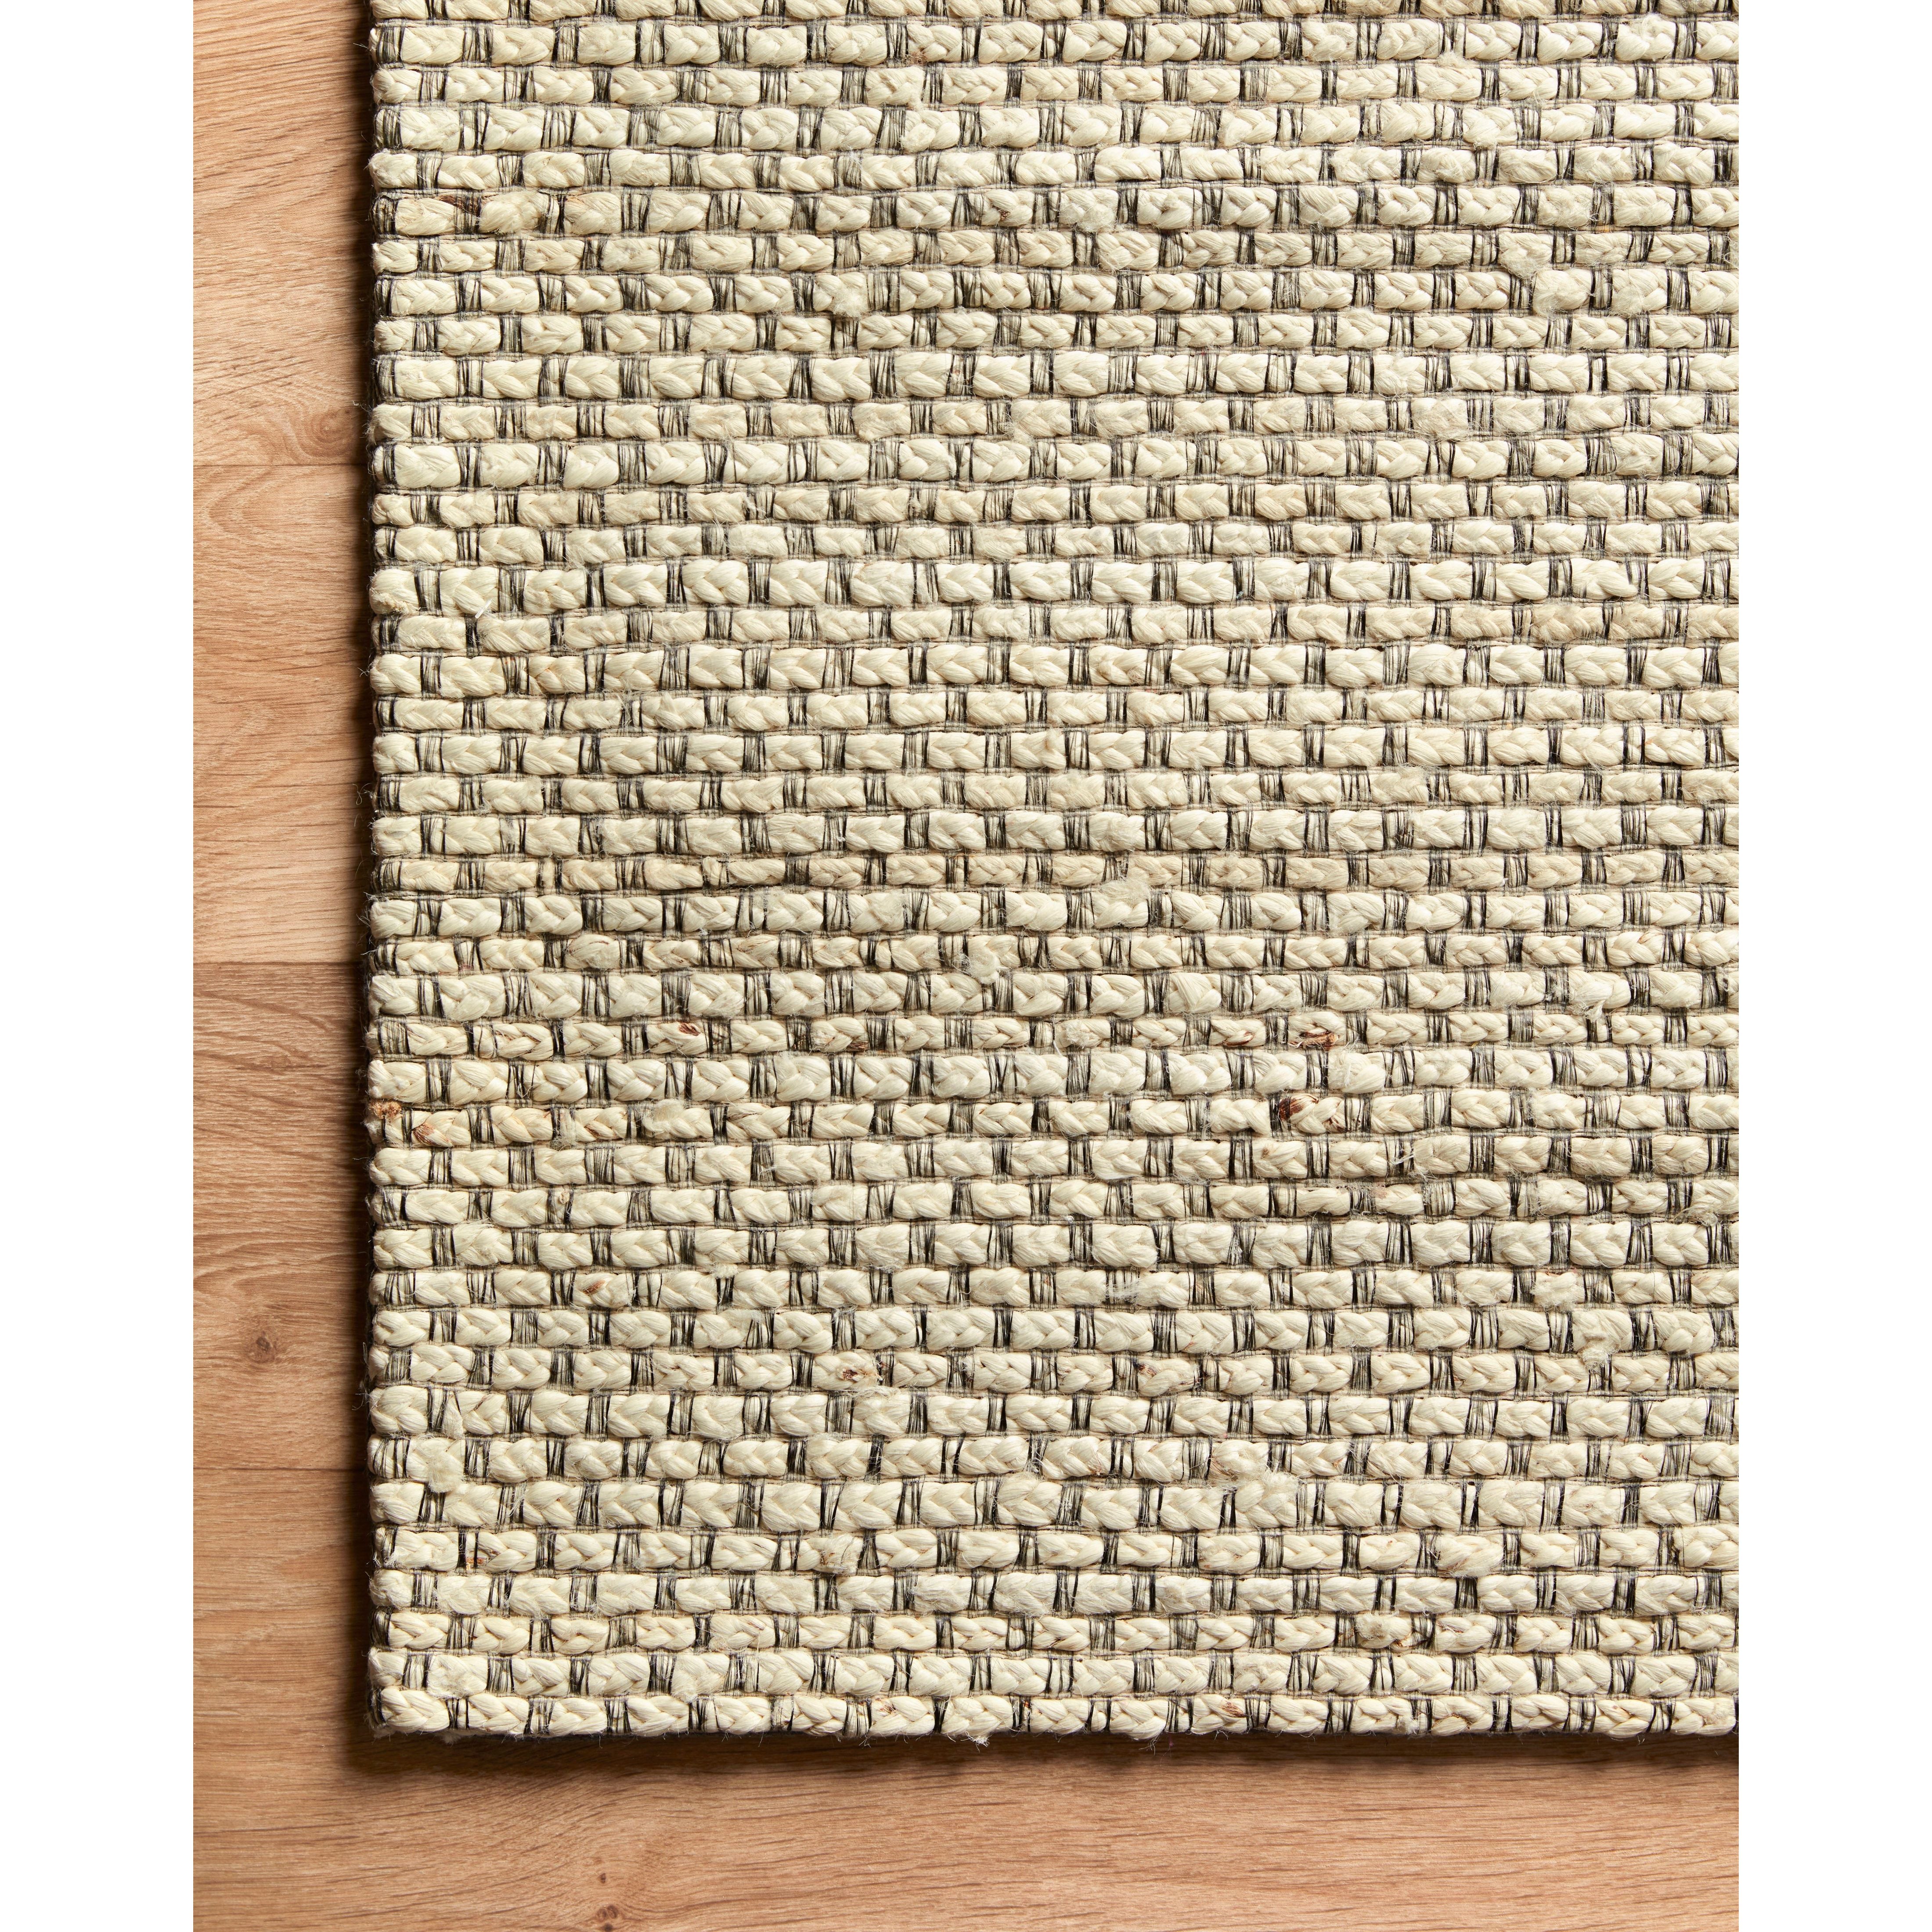 The Loloi Lily Ivory Area Rug, or LIL-01 Ivory, is an earthy base that isn't your average jute area rug. The hand-woven collection has an intricate yet subtle textural look that adds an elevated layer to any style. This area rug would be great for living rooms, dining rooms, or other high-traffic areas. 